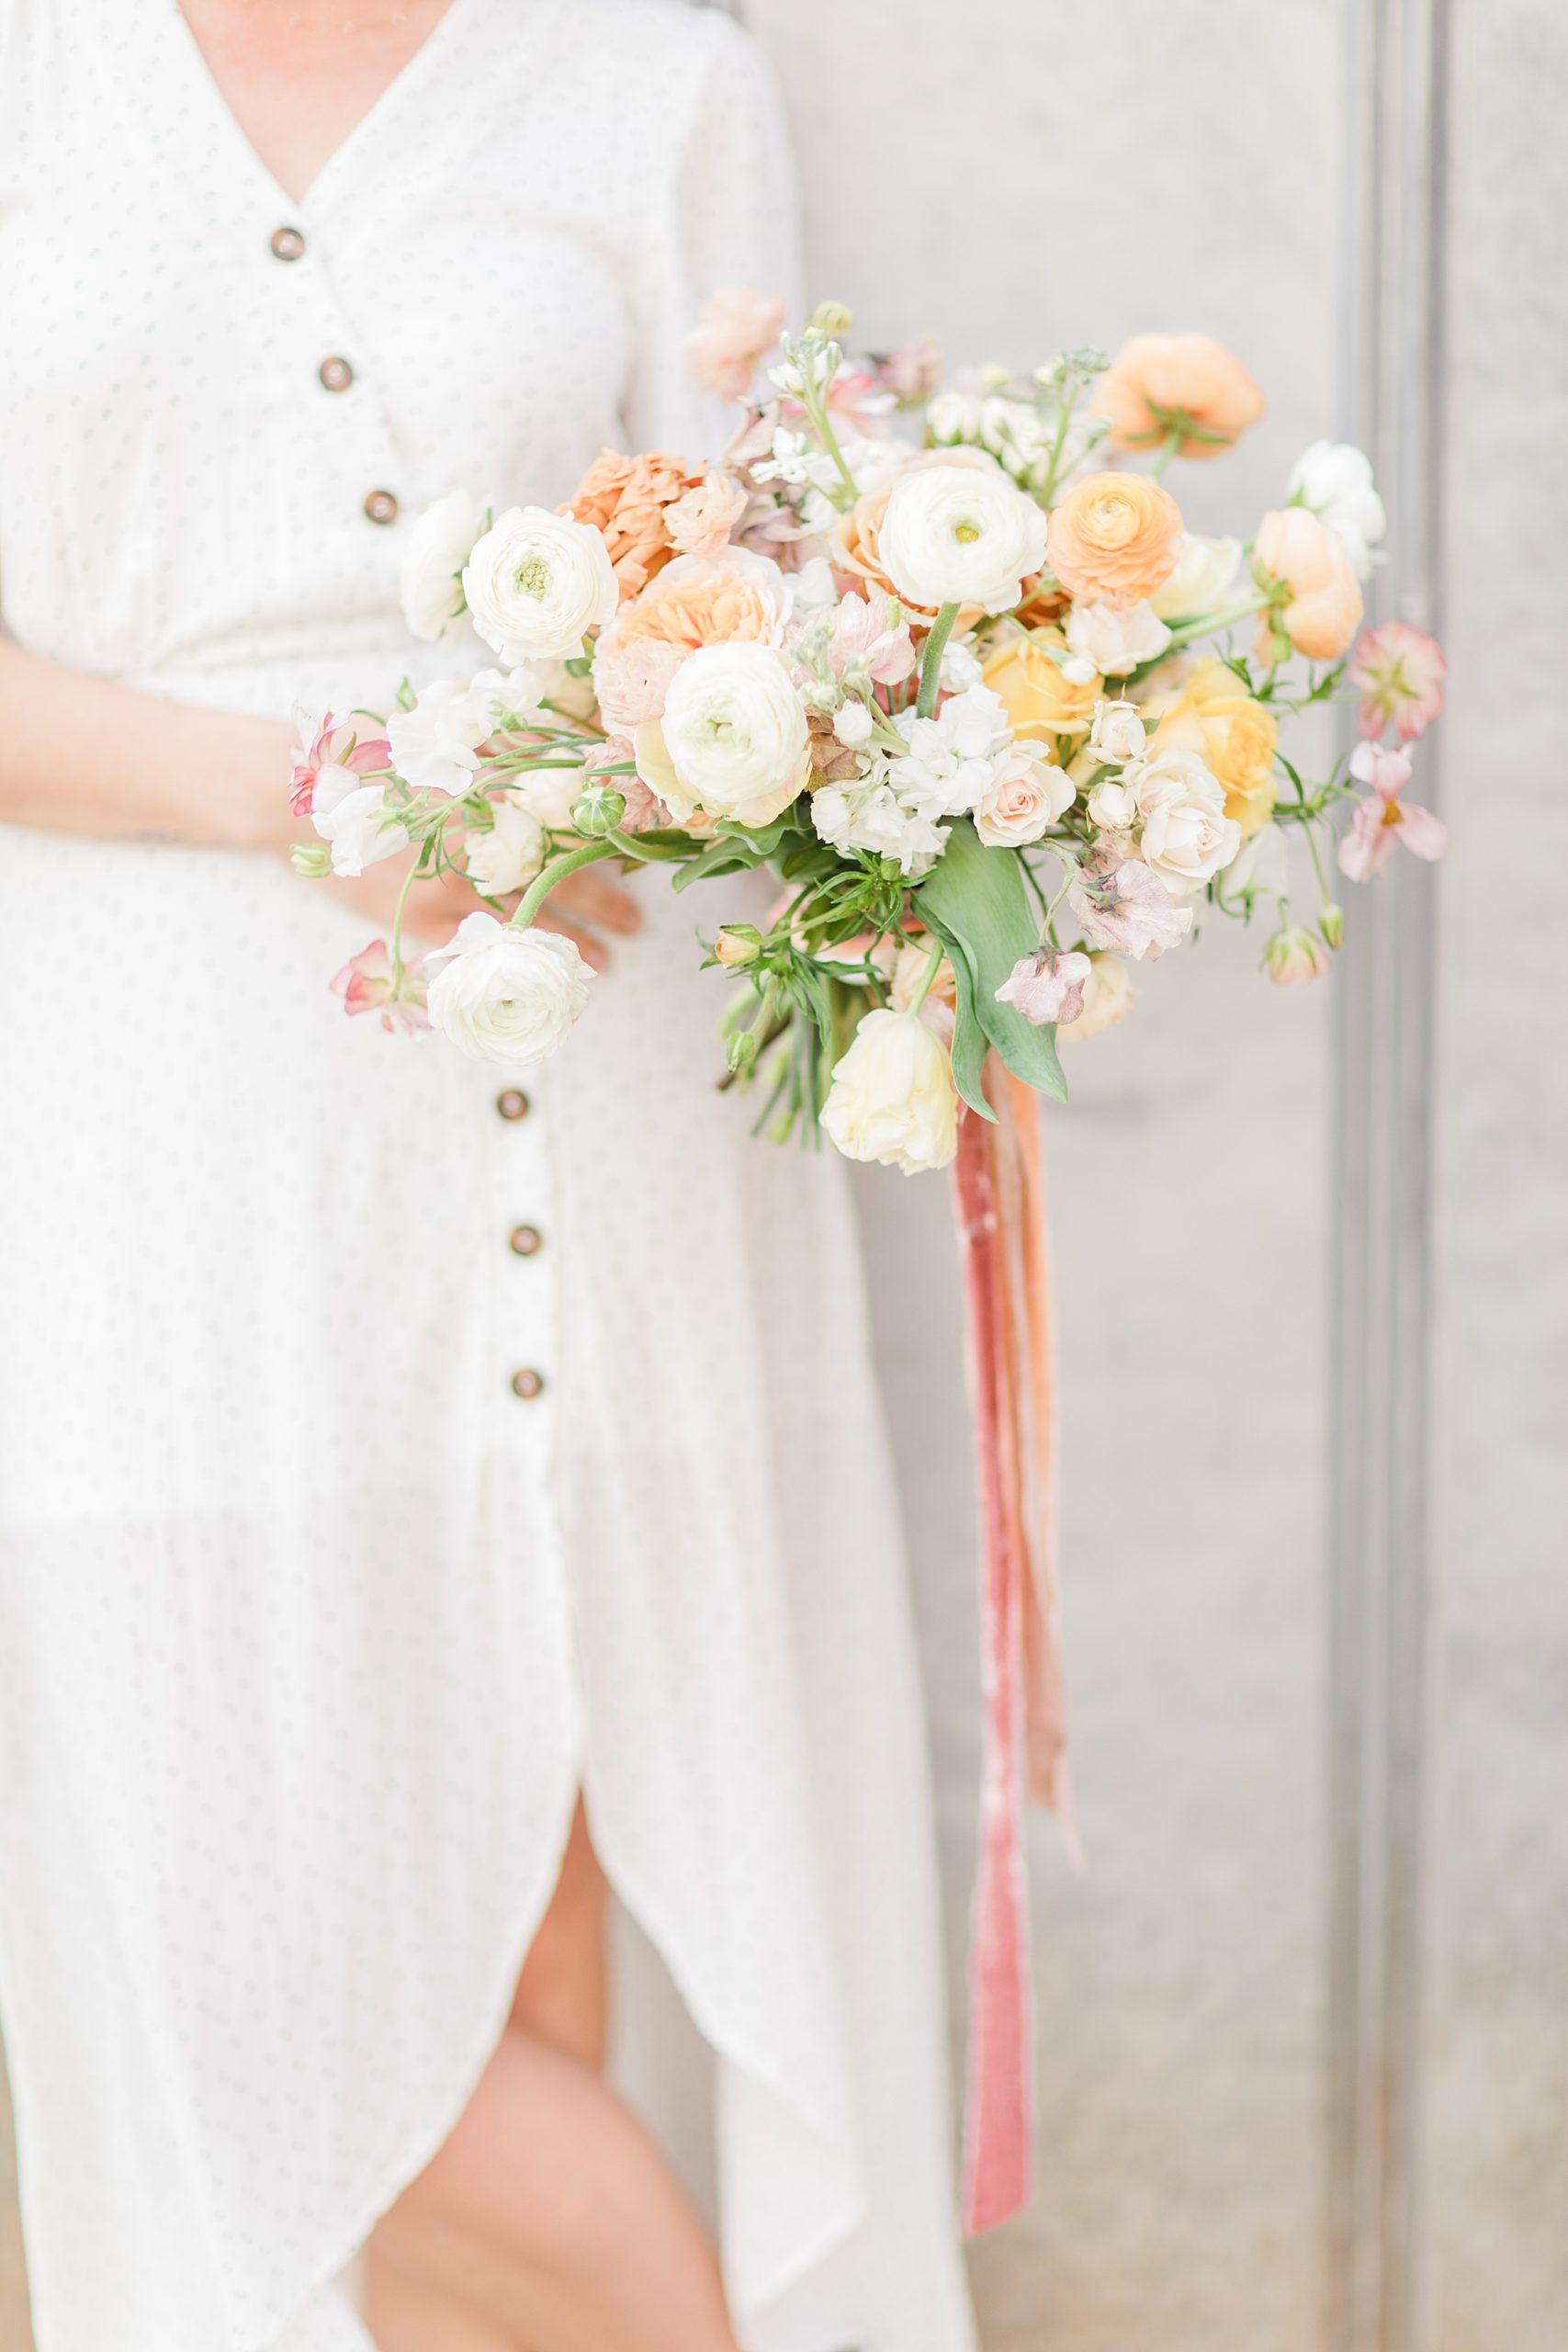 planner holds bouquet of white and yellow flowers